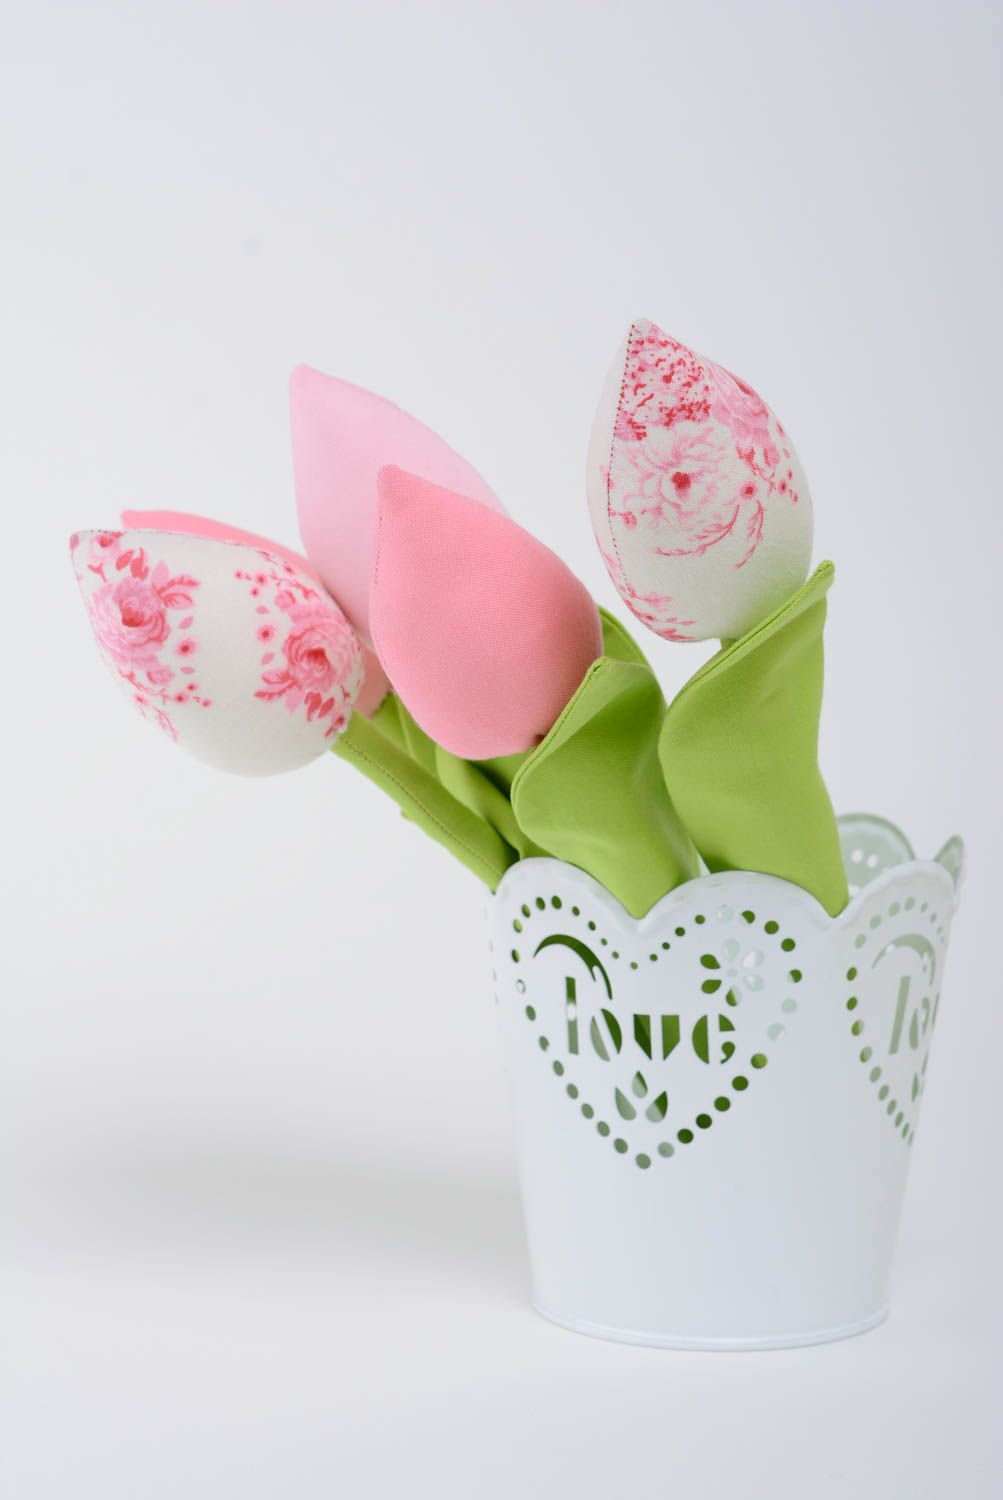 Handmade fabric soft toy flowers for interior decor Pink Tulips photo 5